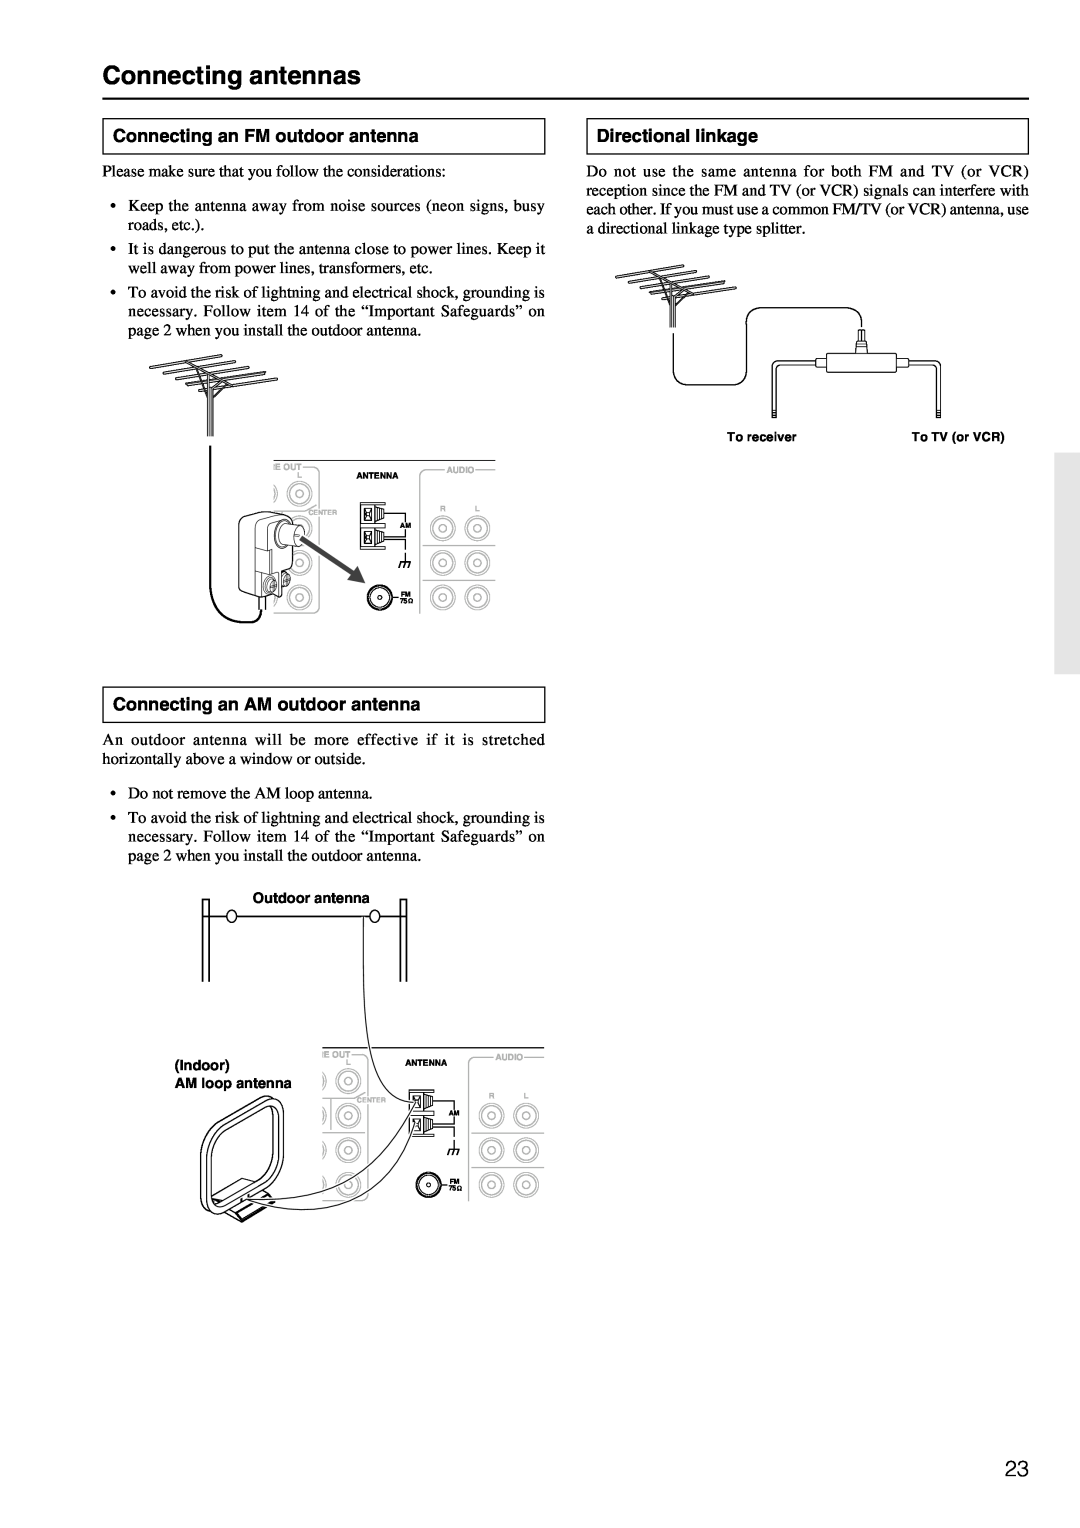 Integra DTR-7.2 instruction manual Connecting antennas, Connecting an FM outdoor antenna, Directional linkage 